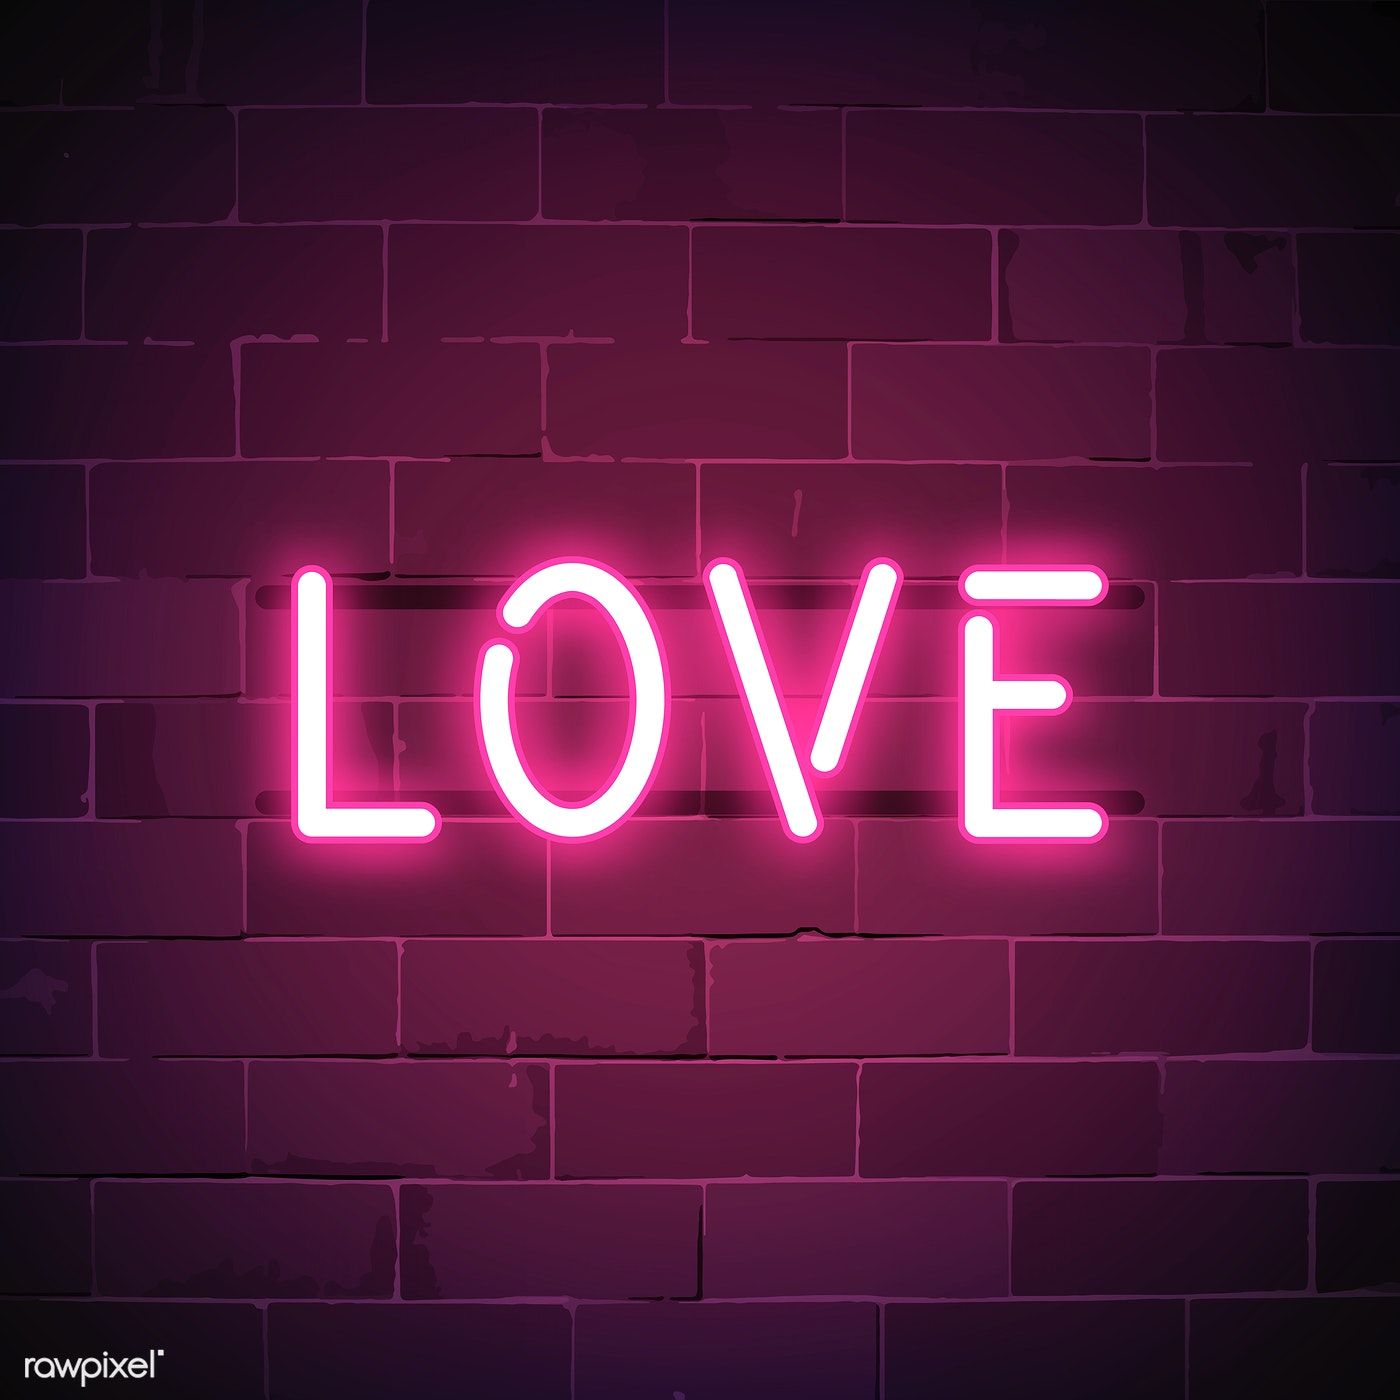 Love is all around neon sign vector. free image / NingZk V. Neon signs, Pink neon sign, Neon